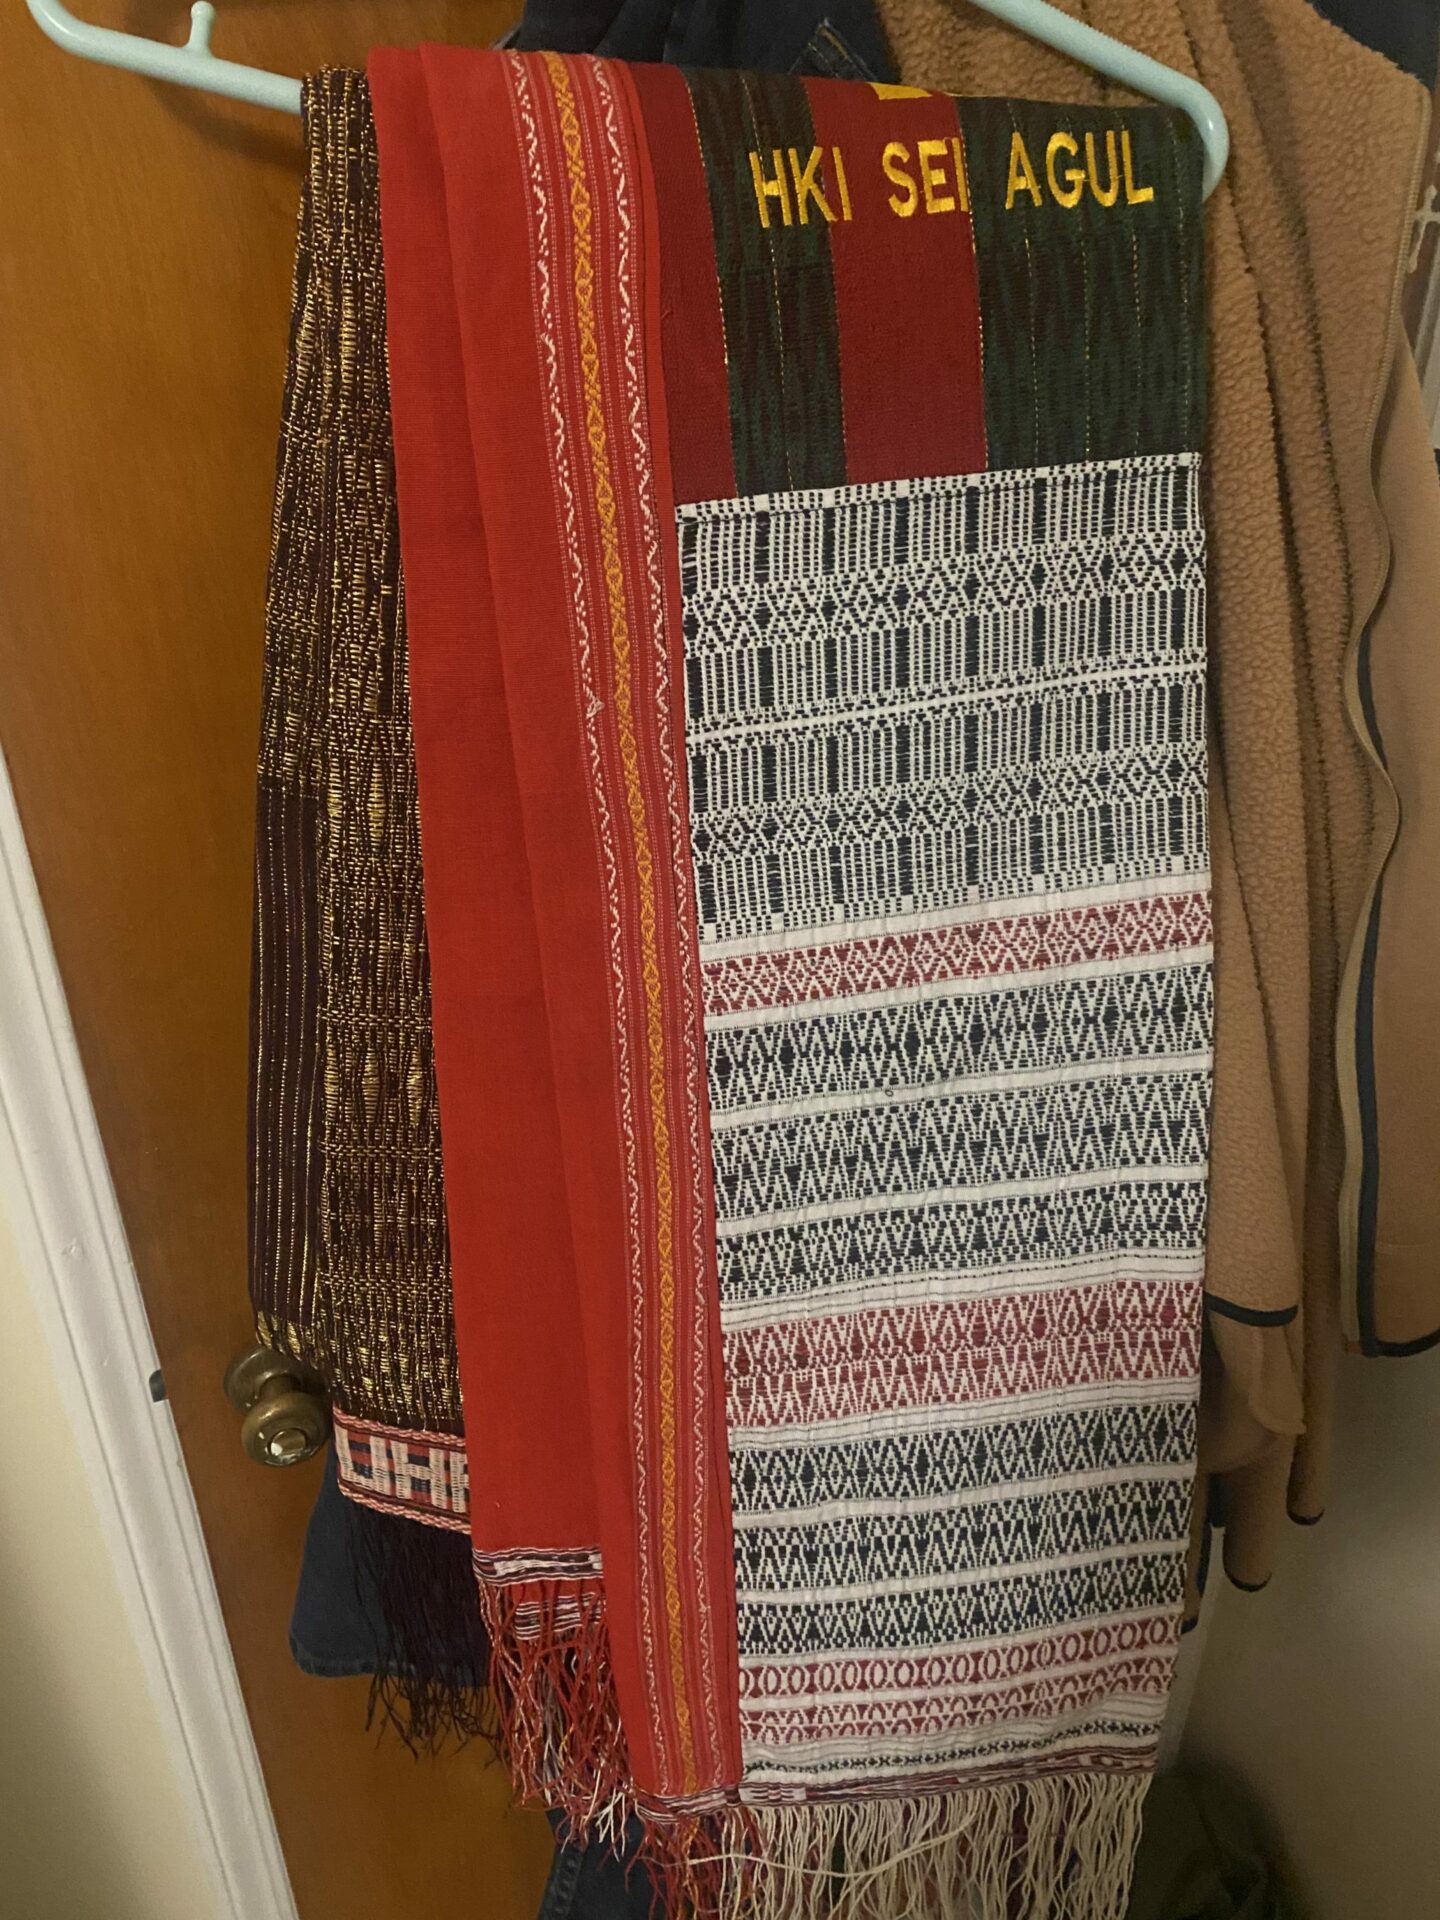 A photograph of an Ulos. The Ulos is a woven textile, with loose threads hanging out of the ends of both sides. It is red, white, and black